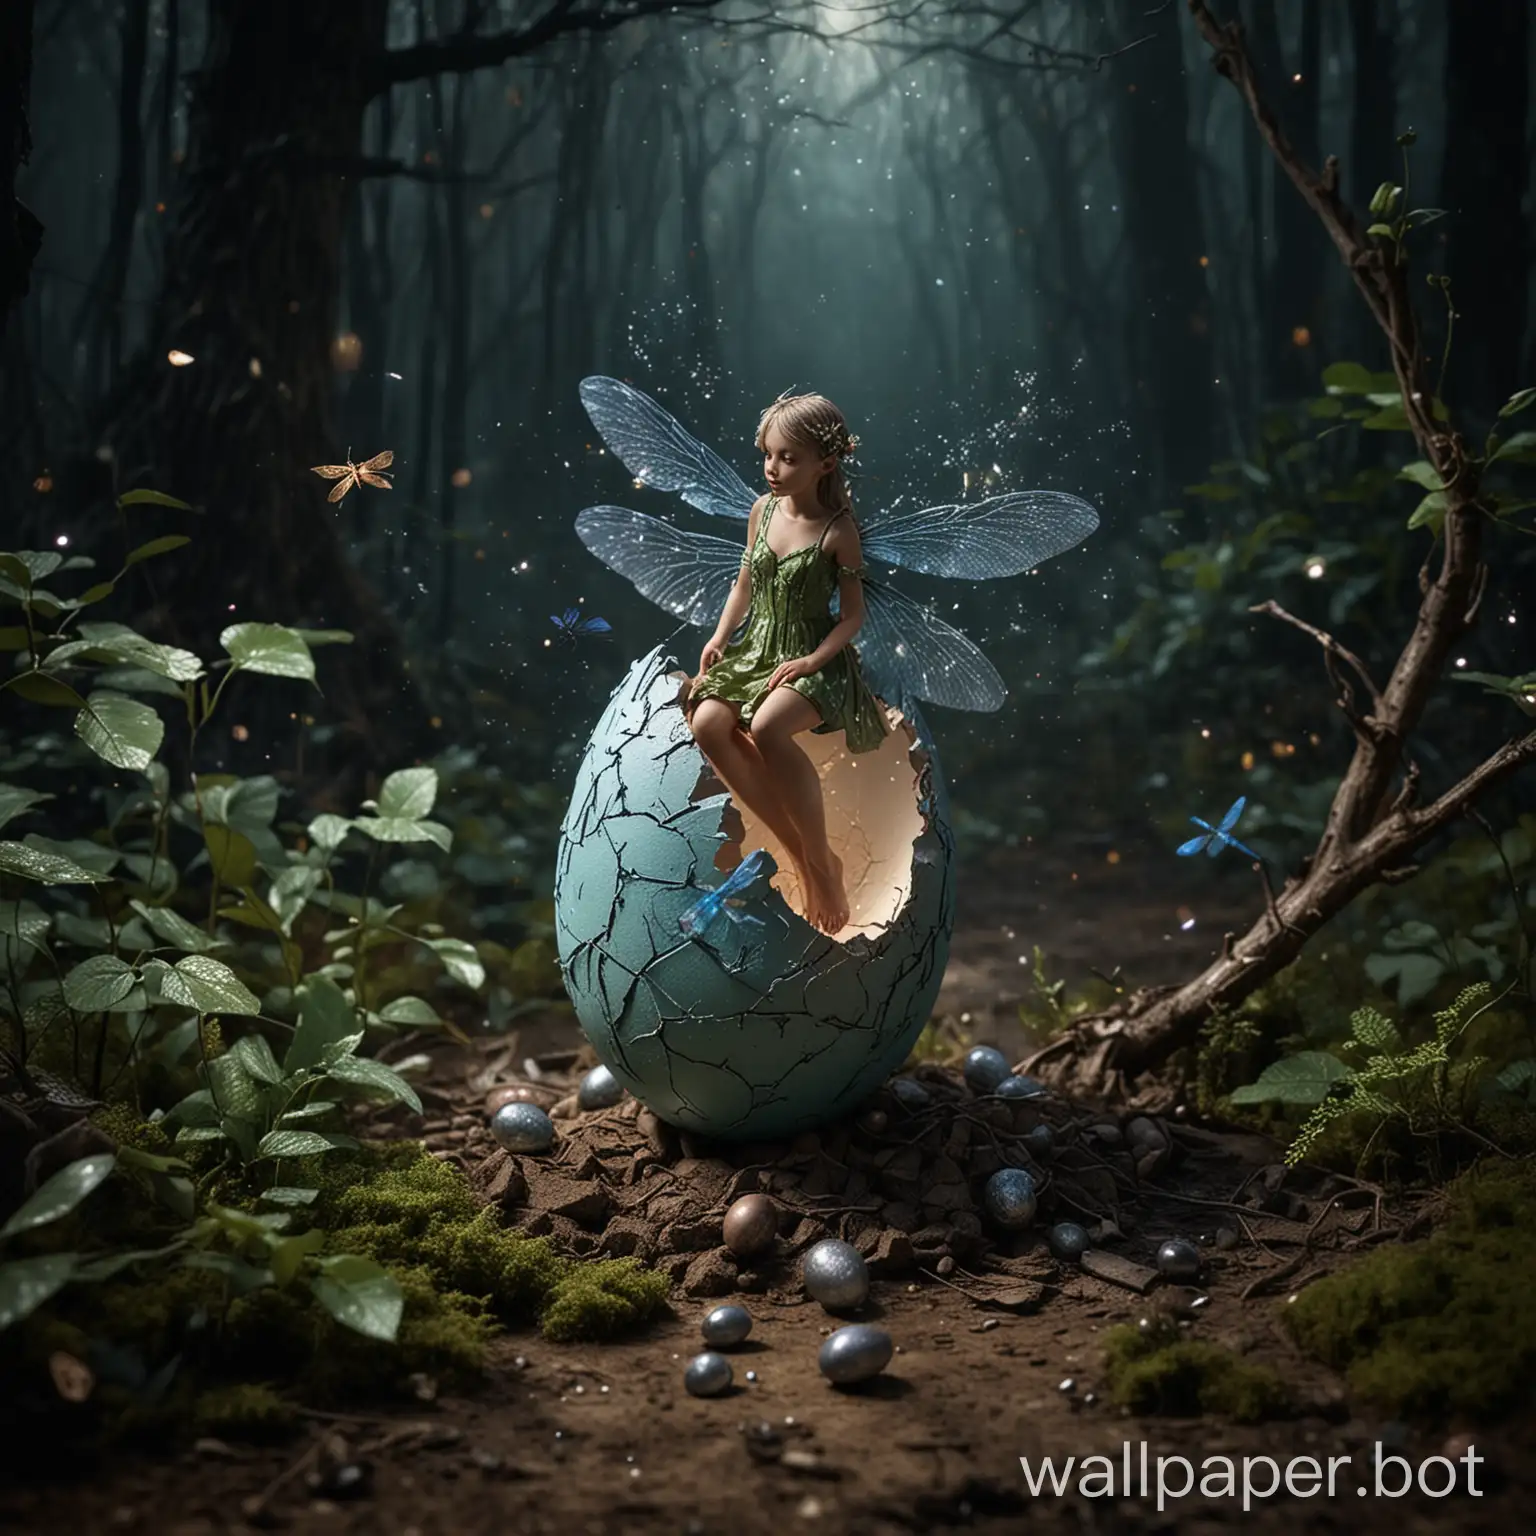 Enchanting-Scene-Little-Fairy-Emerging-from-Cracked-Egg-in-a-Spring-Forest